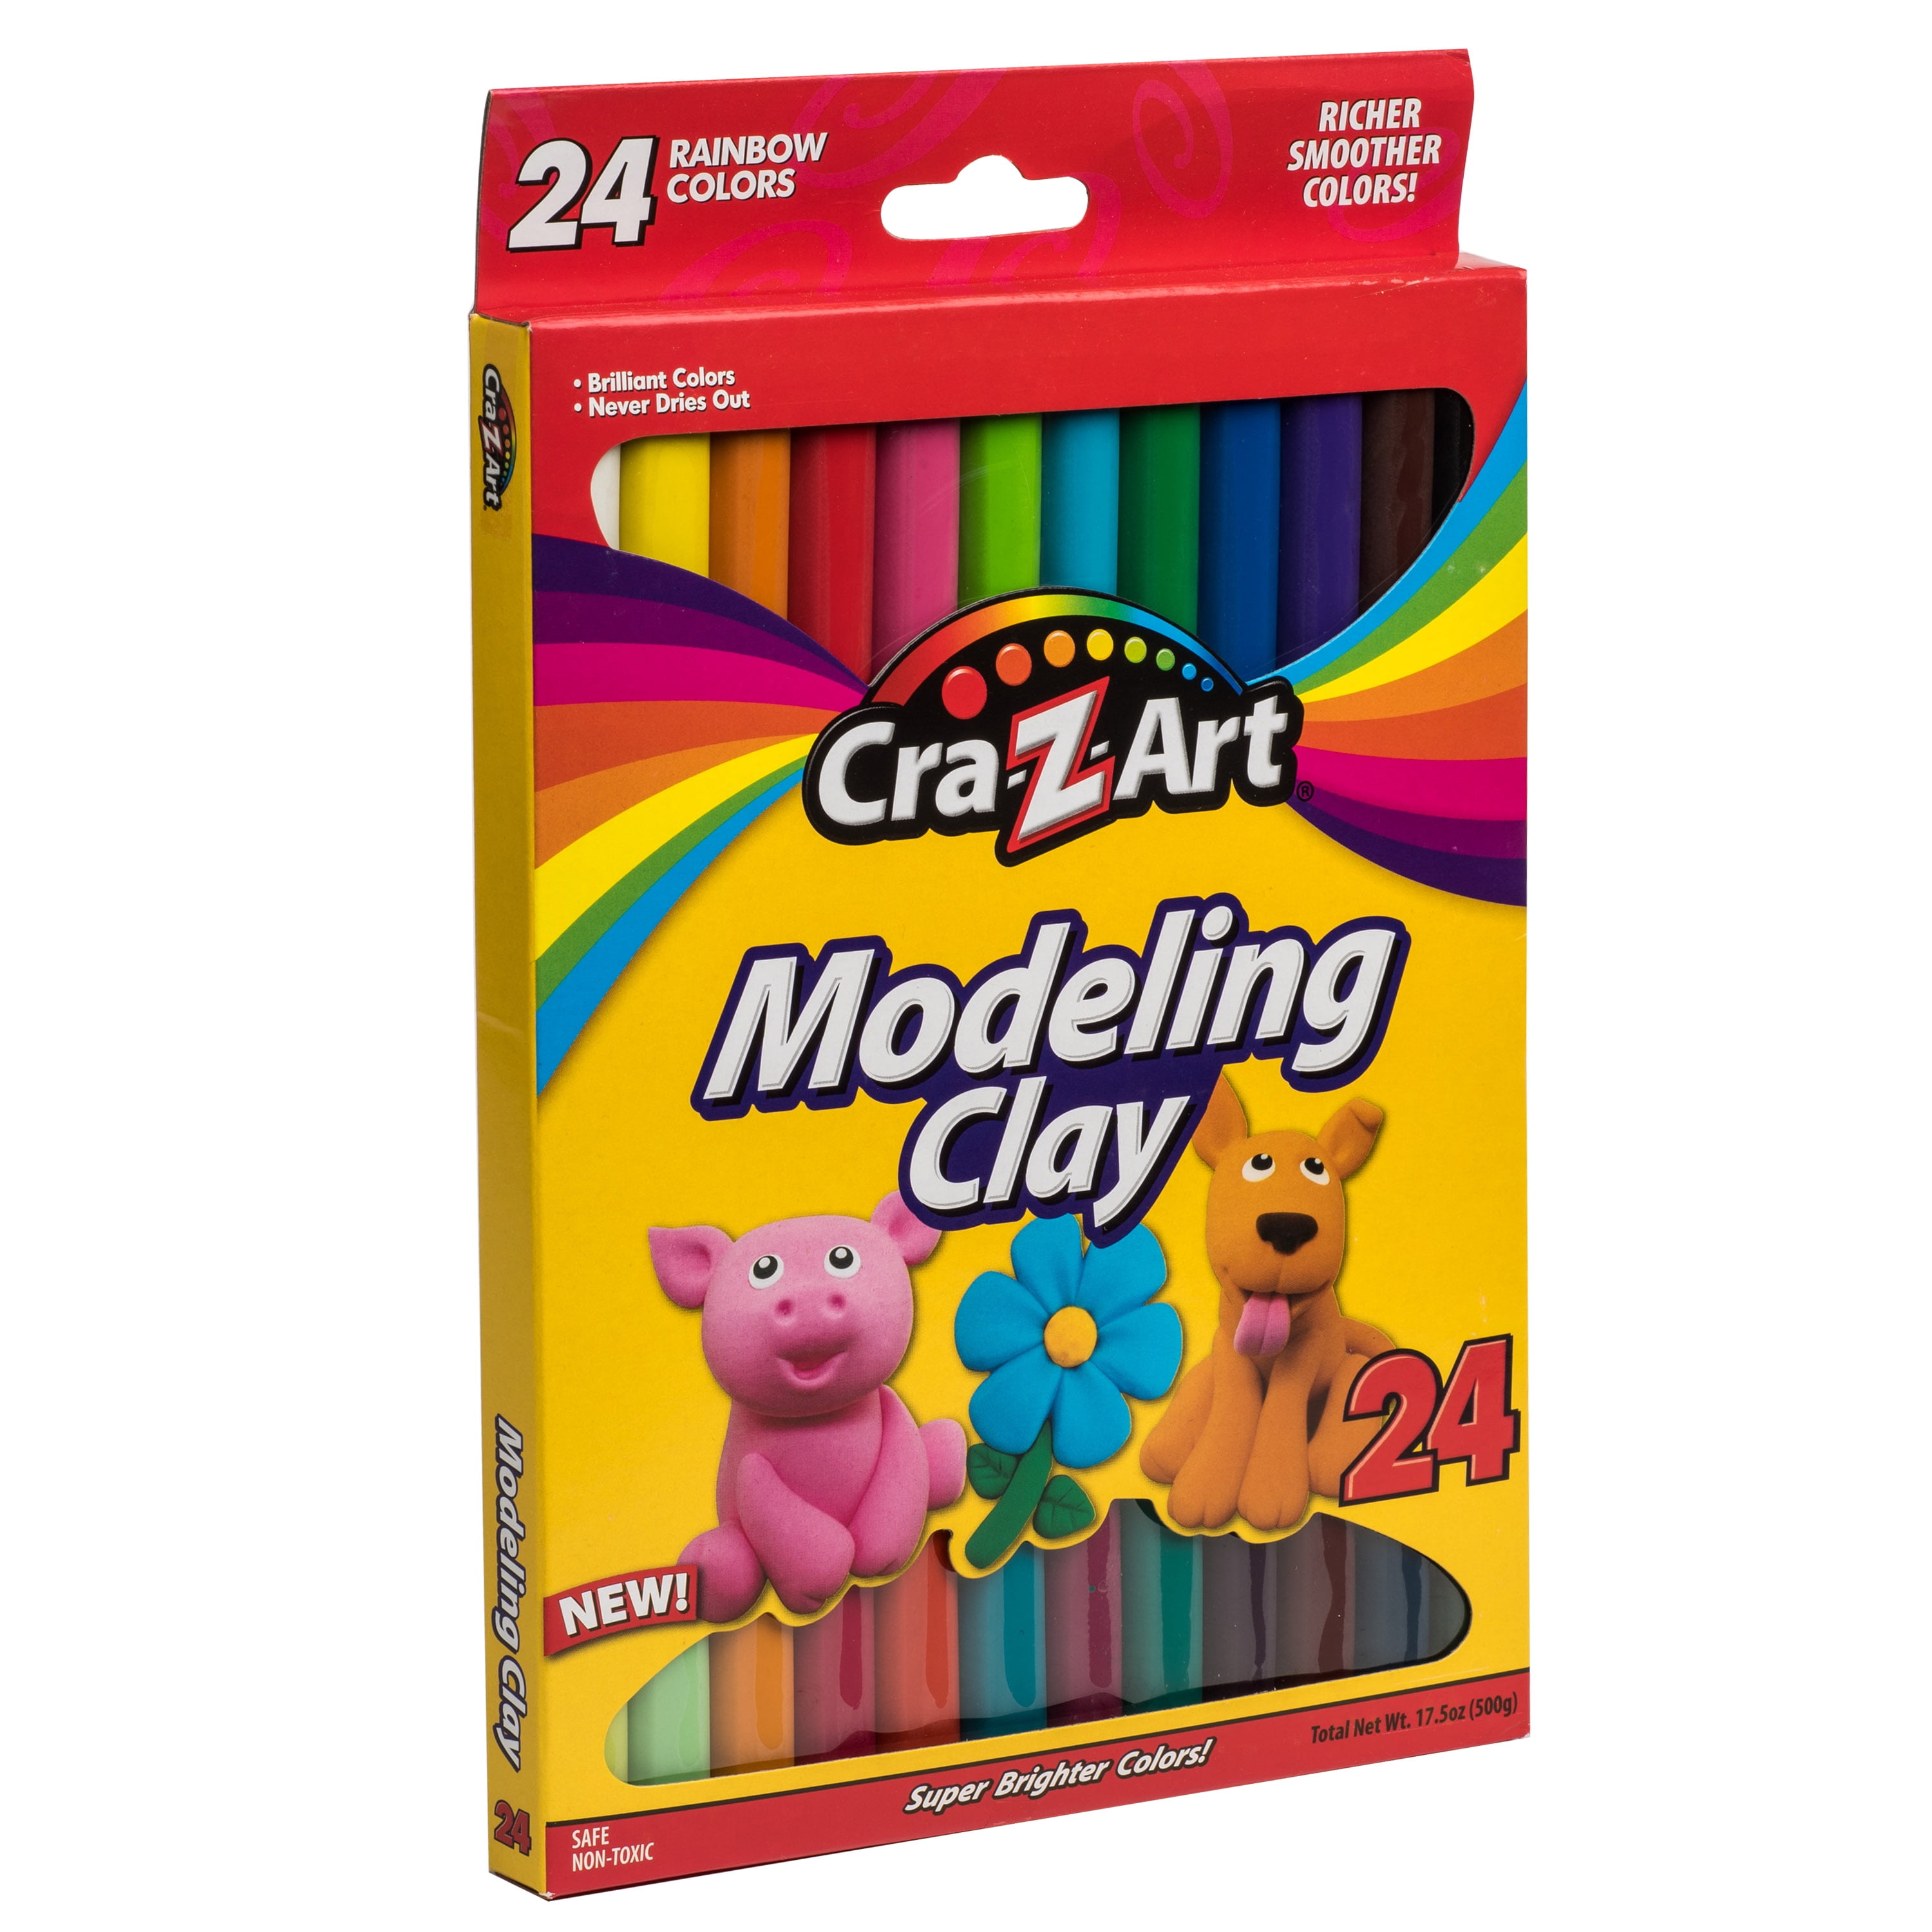 where can i get modeling clay